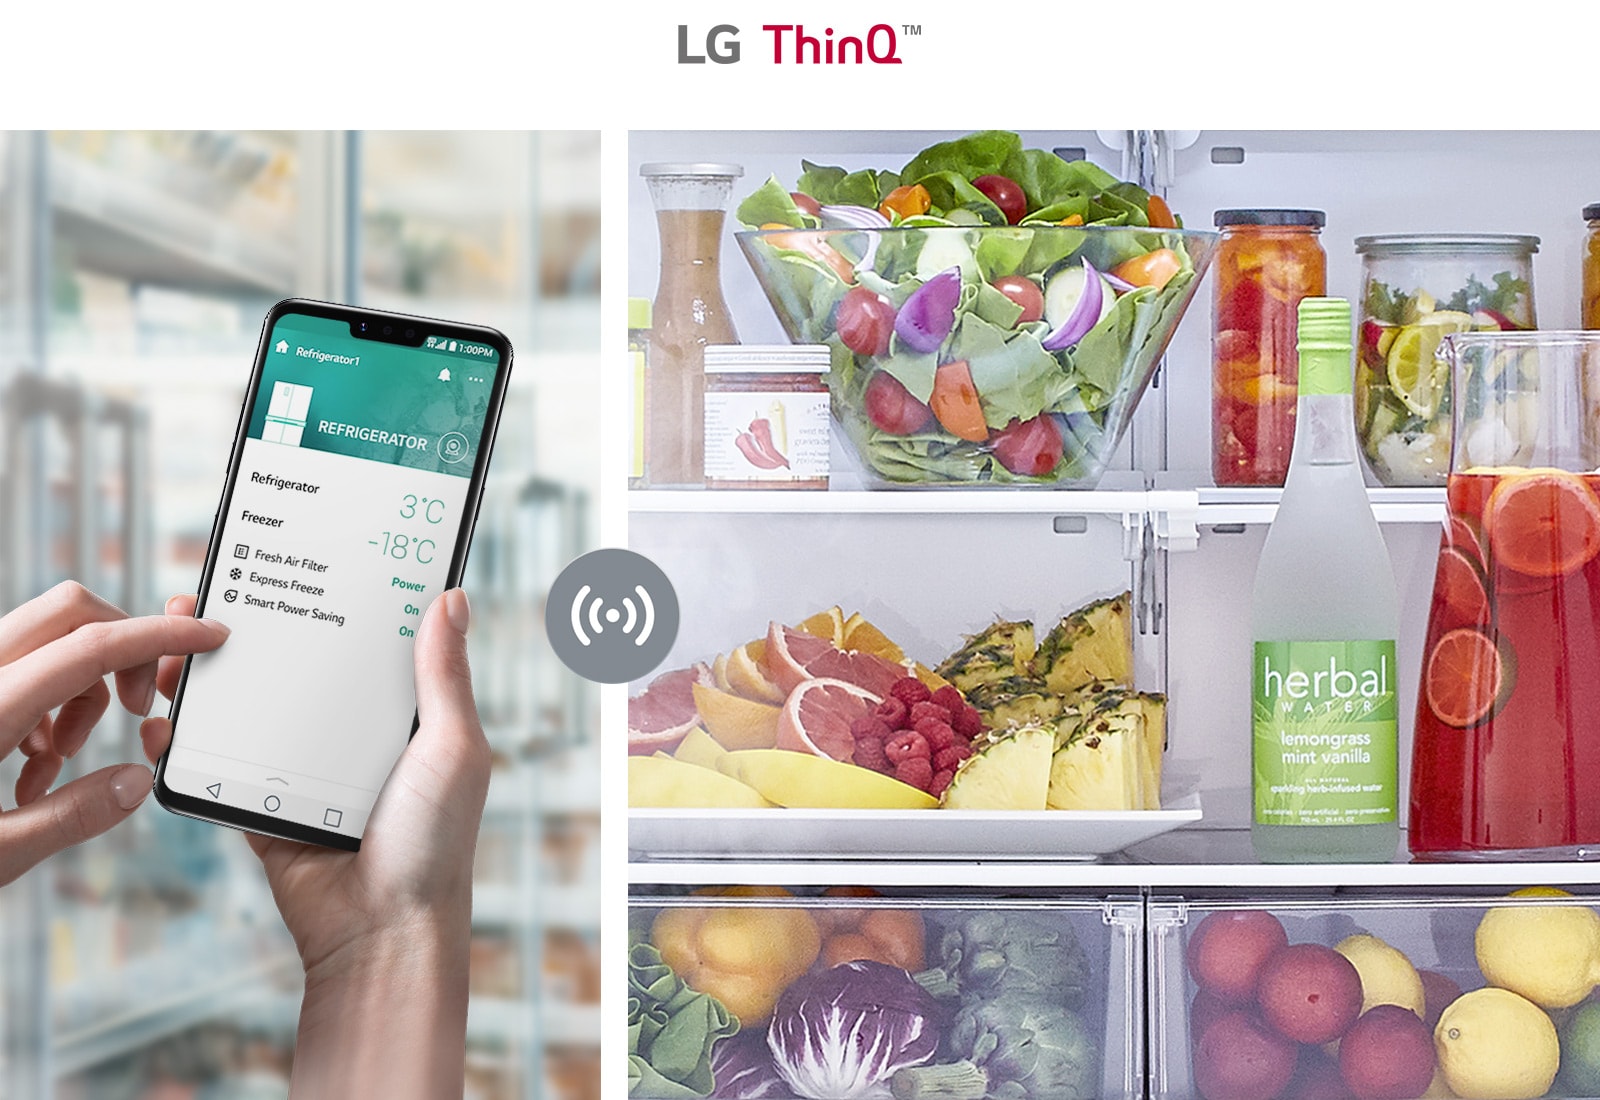 LG ThinQ™: Control Your Refrigerator Anywhere